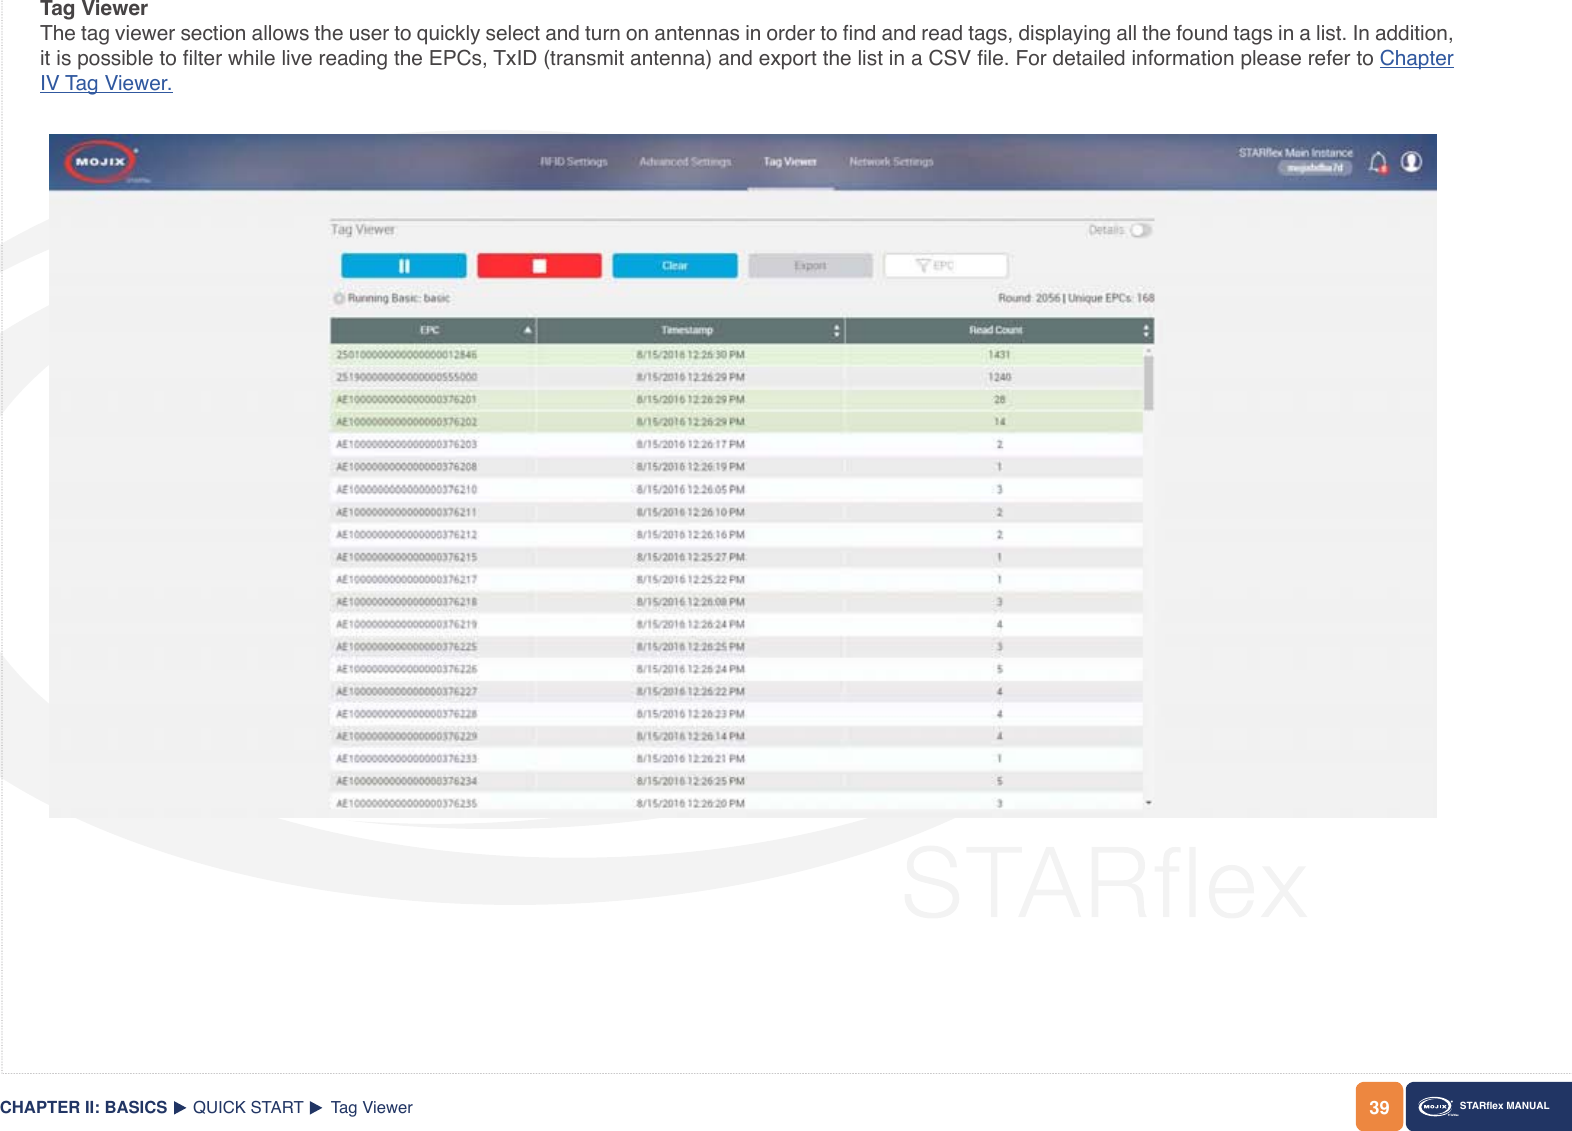 39CHAPTER II: BASICS STARex MANUALQUICK START Tag ViewerTag ViewerThe tag viewer section allows the user to quickly select and turn on antennas in order to nd and read tags, displaying all the found tags in a list. In addition, it is possible to lter while live reading the EPCs, TxID (transmit antenna) and export the list in a CSV le. For detailed information please refer to Chapter IV Tag Viewer.